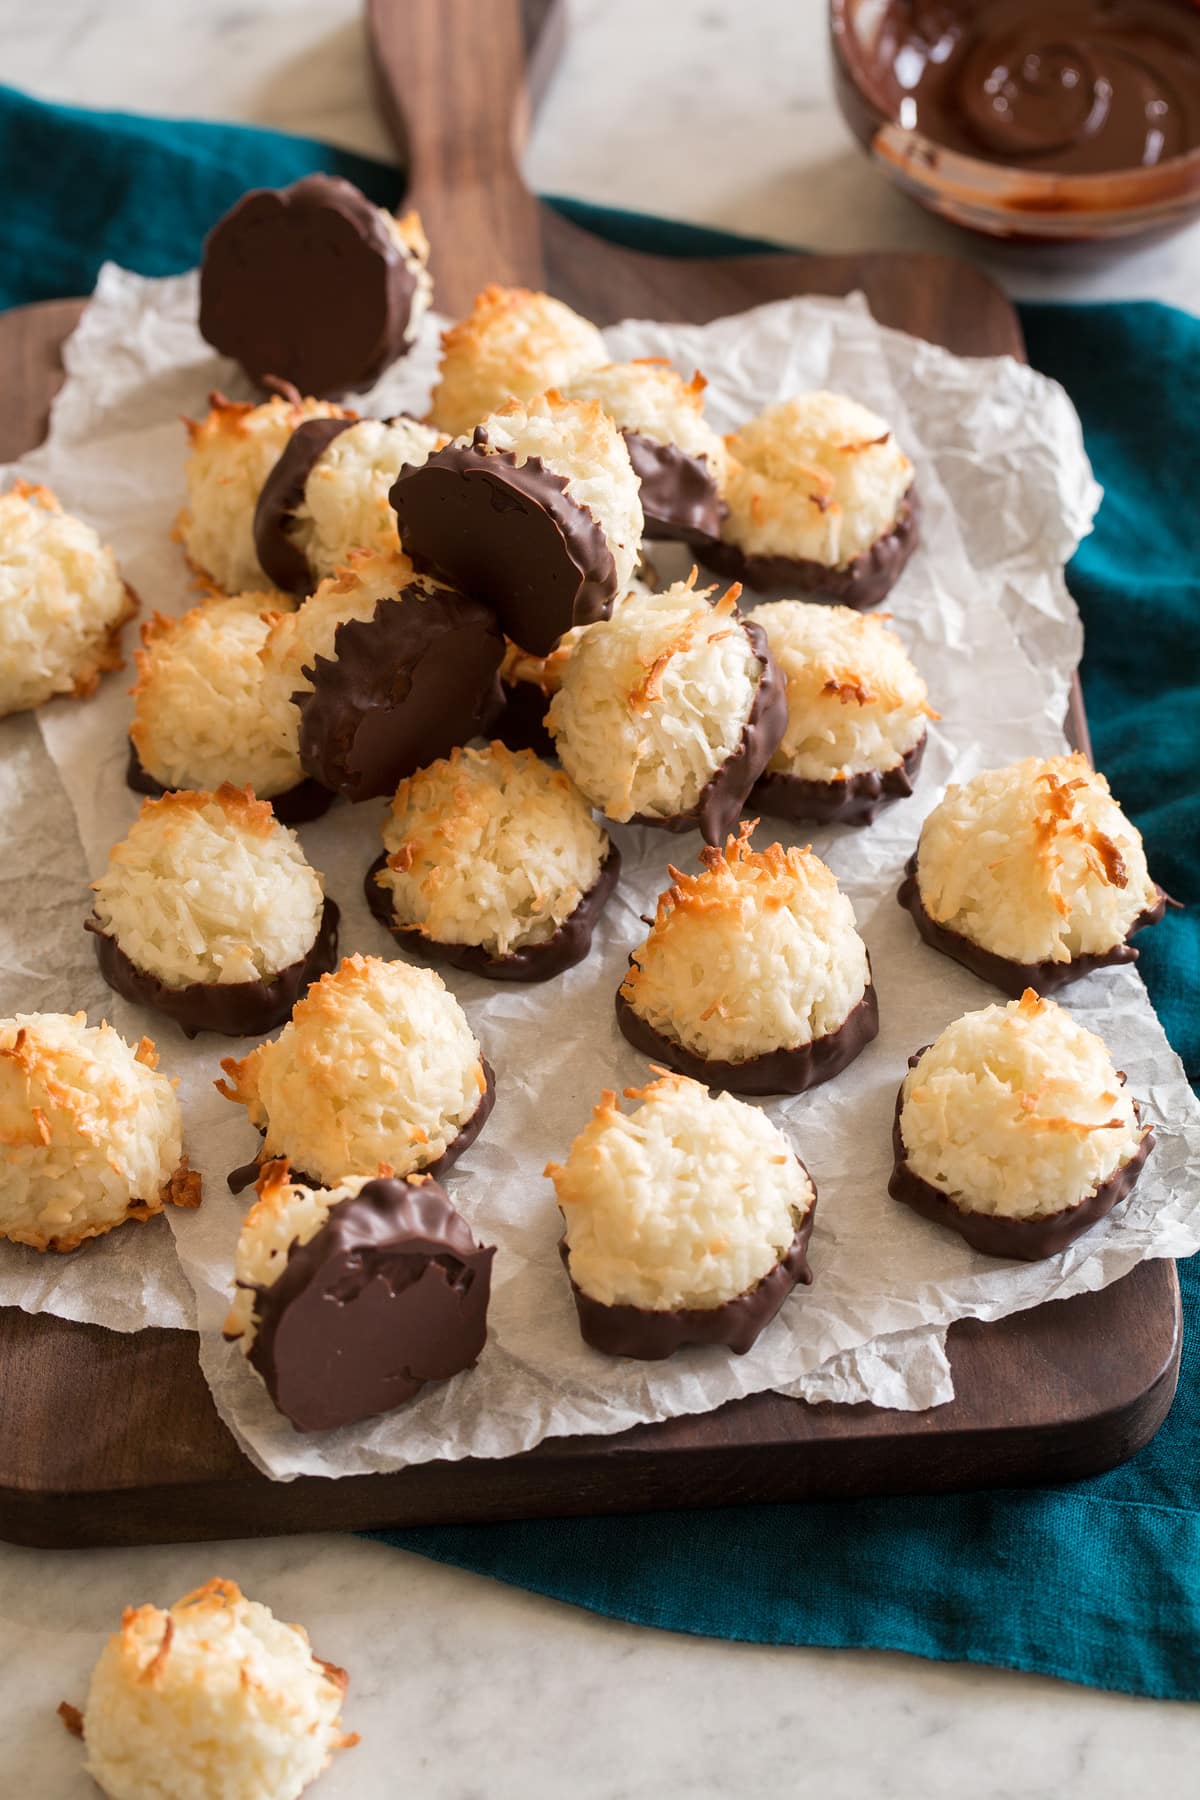 Coconut macaroons on parchment paper and a wooden board.